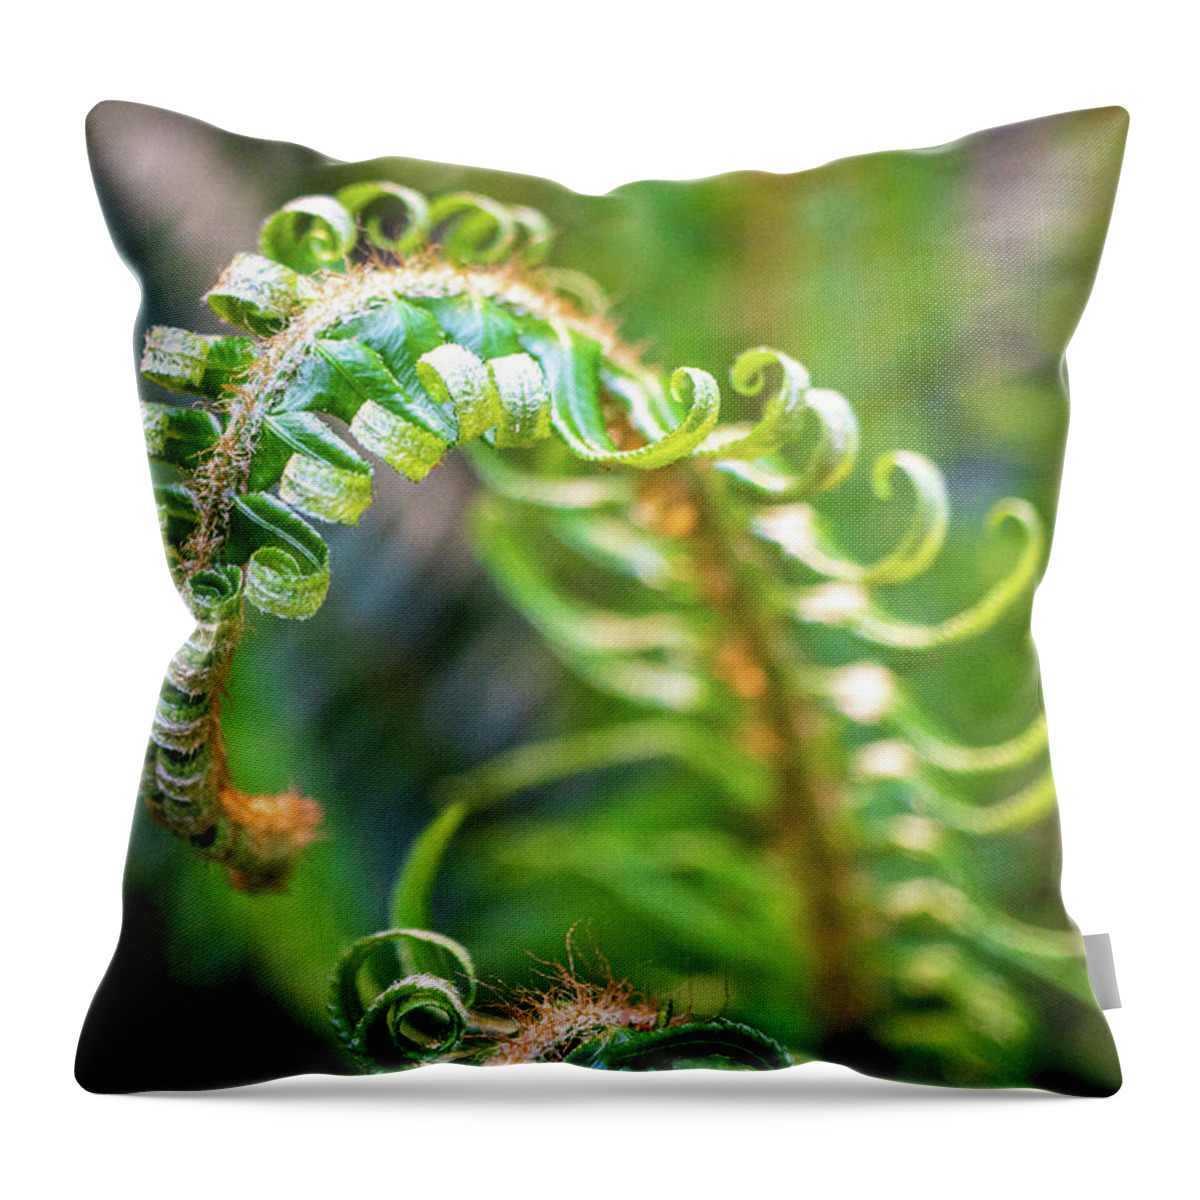 Leaves Throw Pillow featuring the photograph Curling Frond by Louise Kornreich